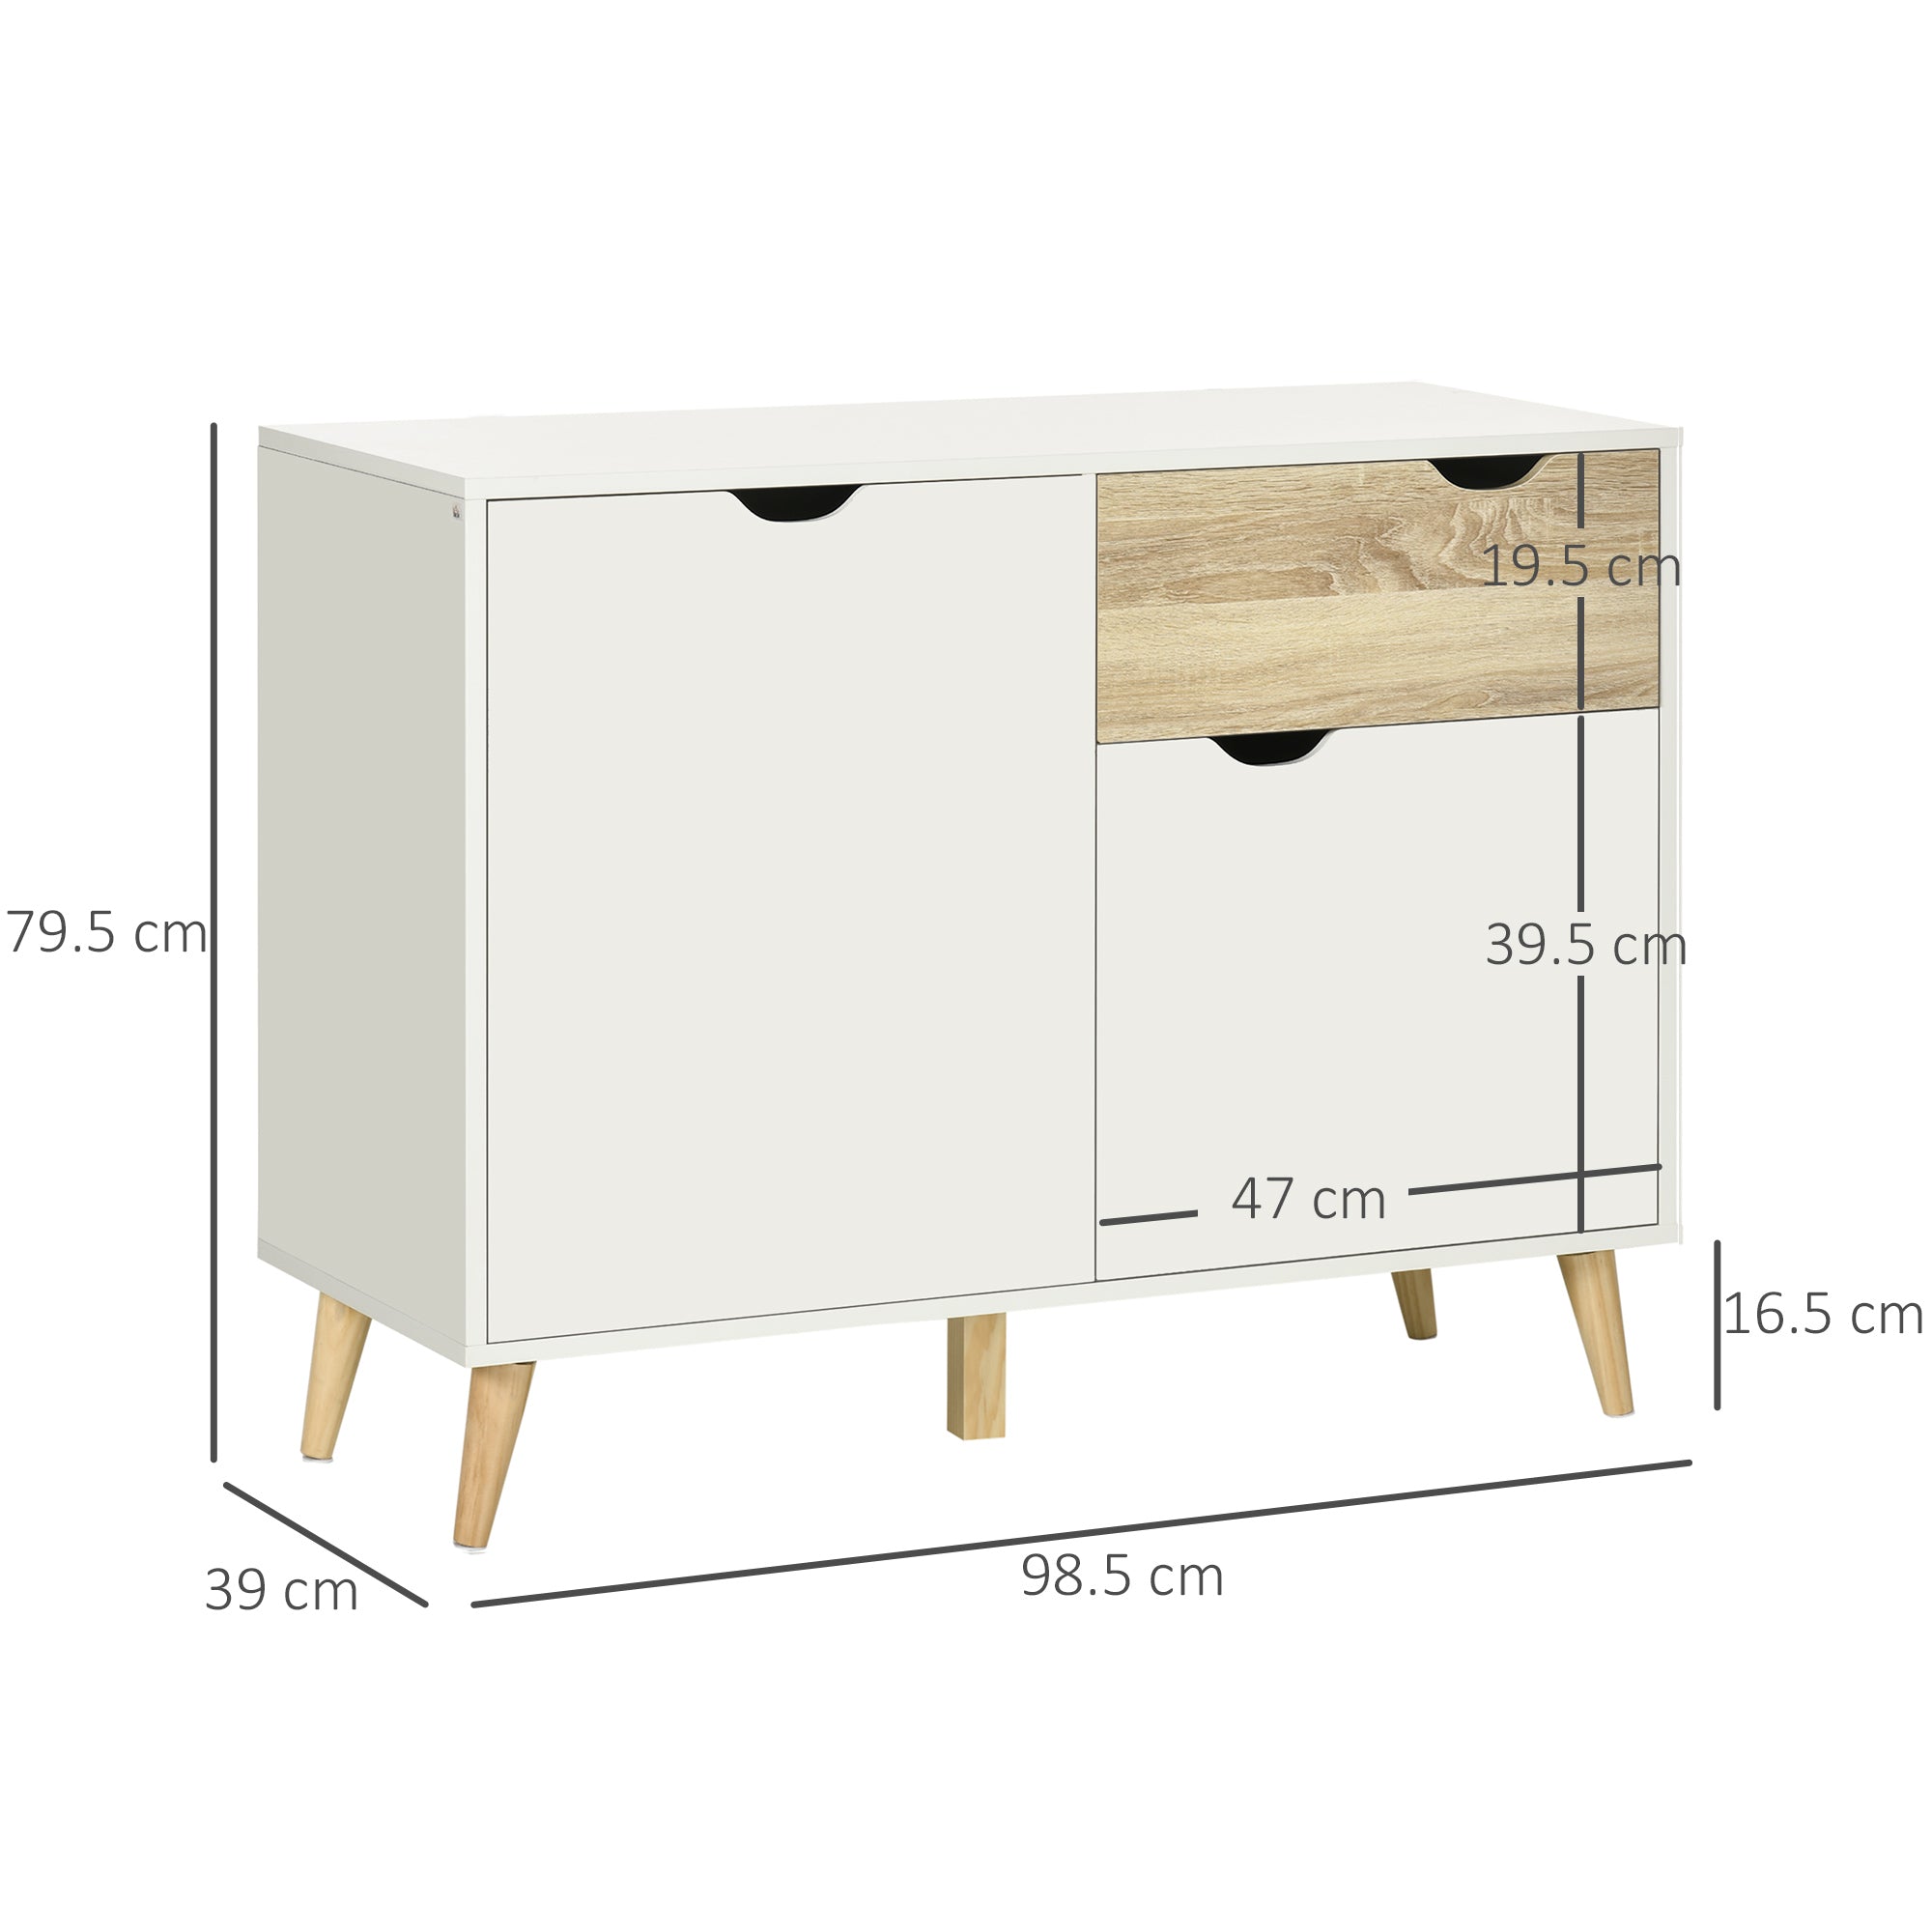 HOMCOM Modern Sideboard Storage Cabinet, Free Standing Accent Cupboard with Drawer, 2 Doors for Bedroom, Living Room, Hallway, White